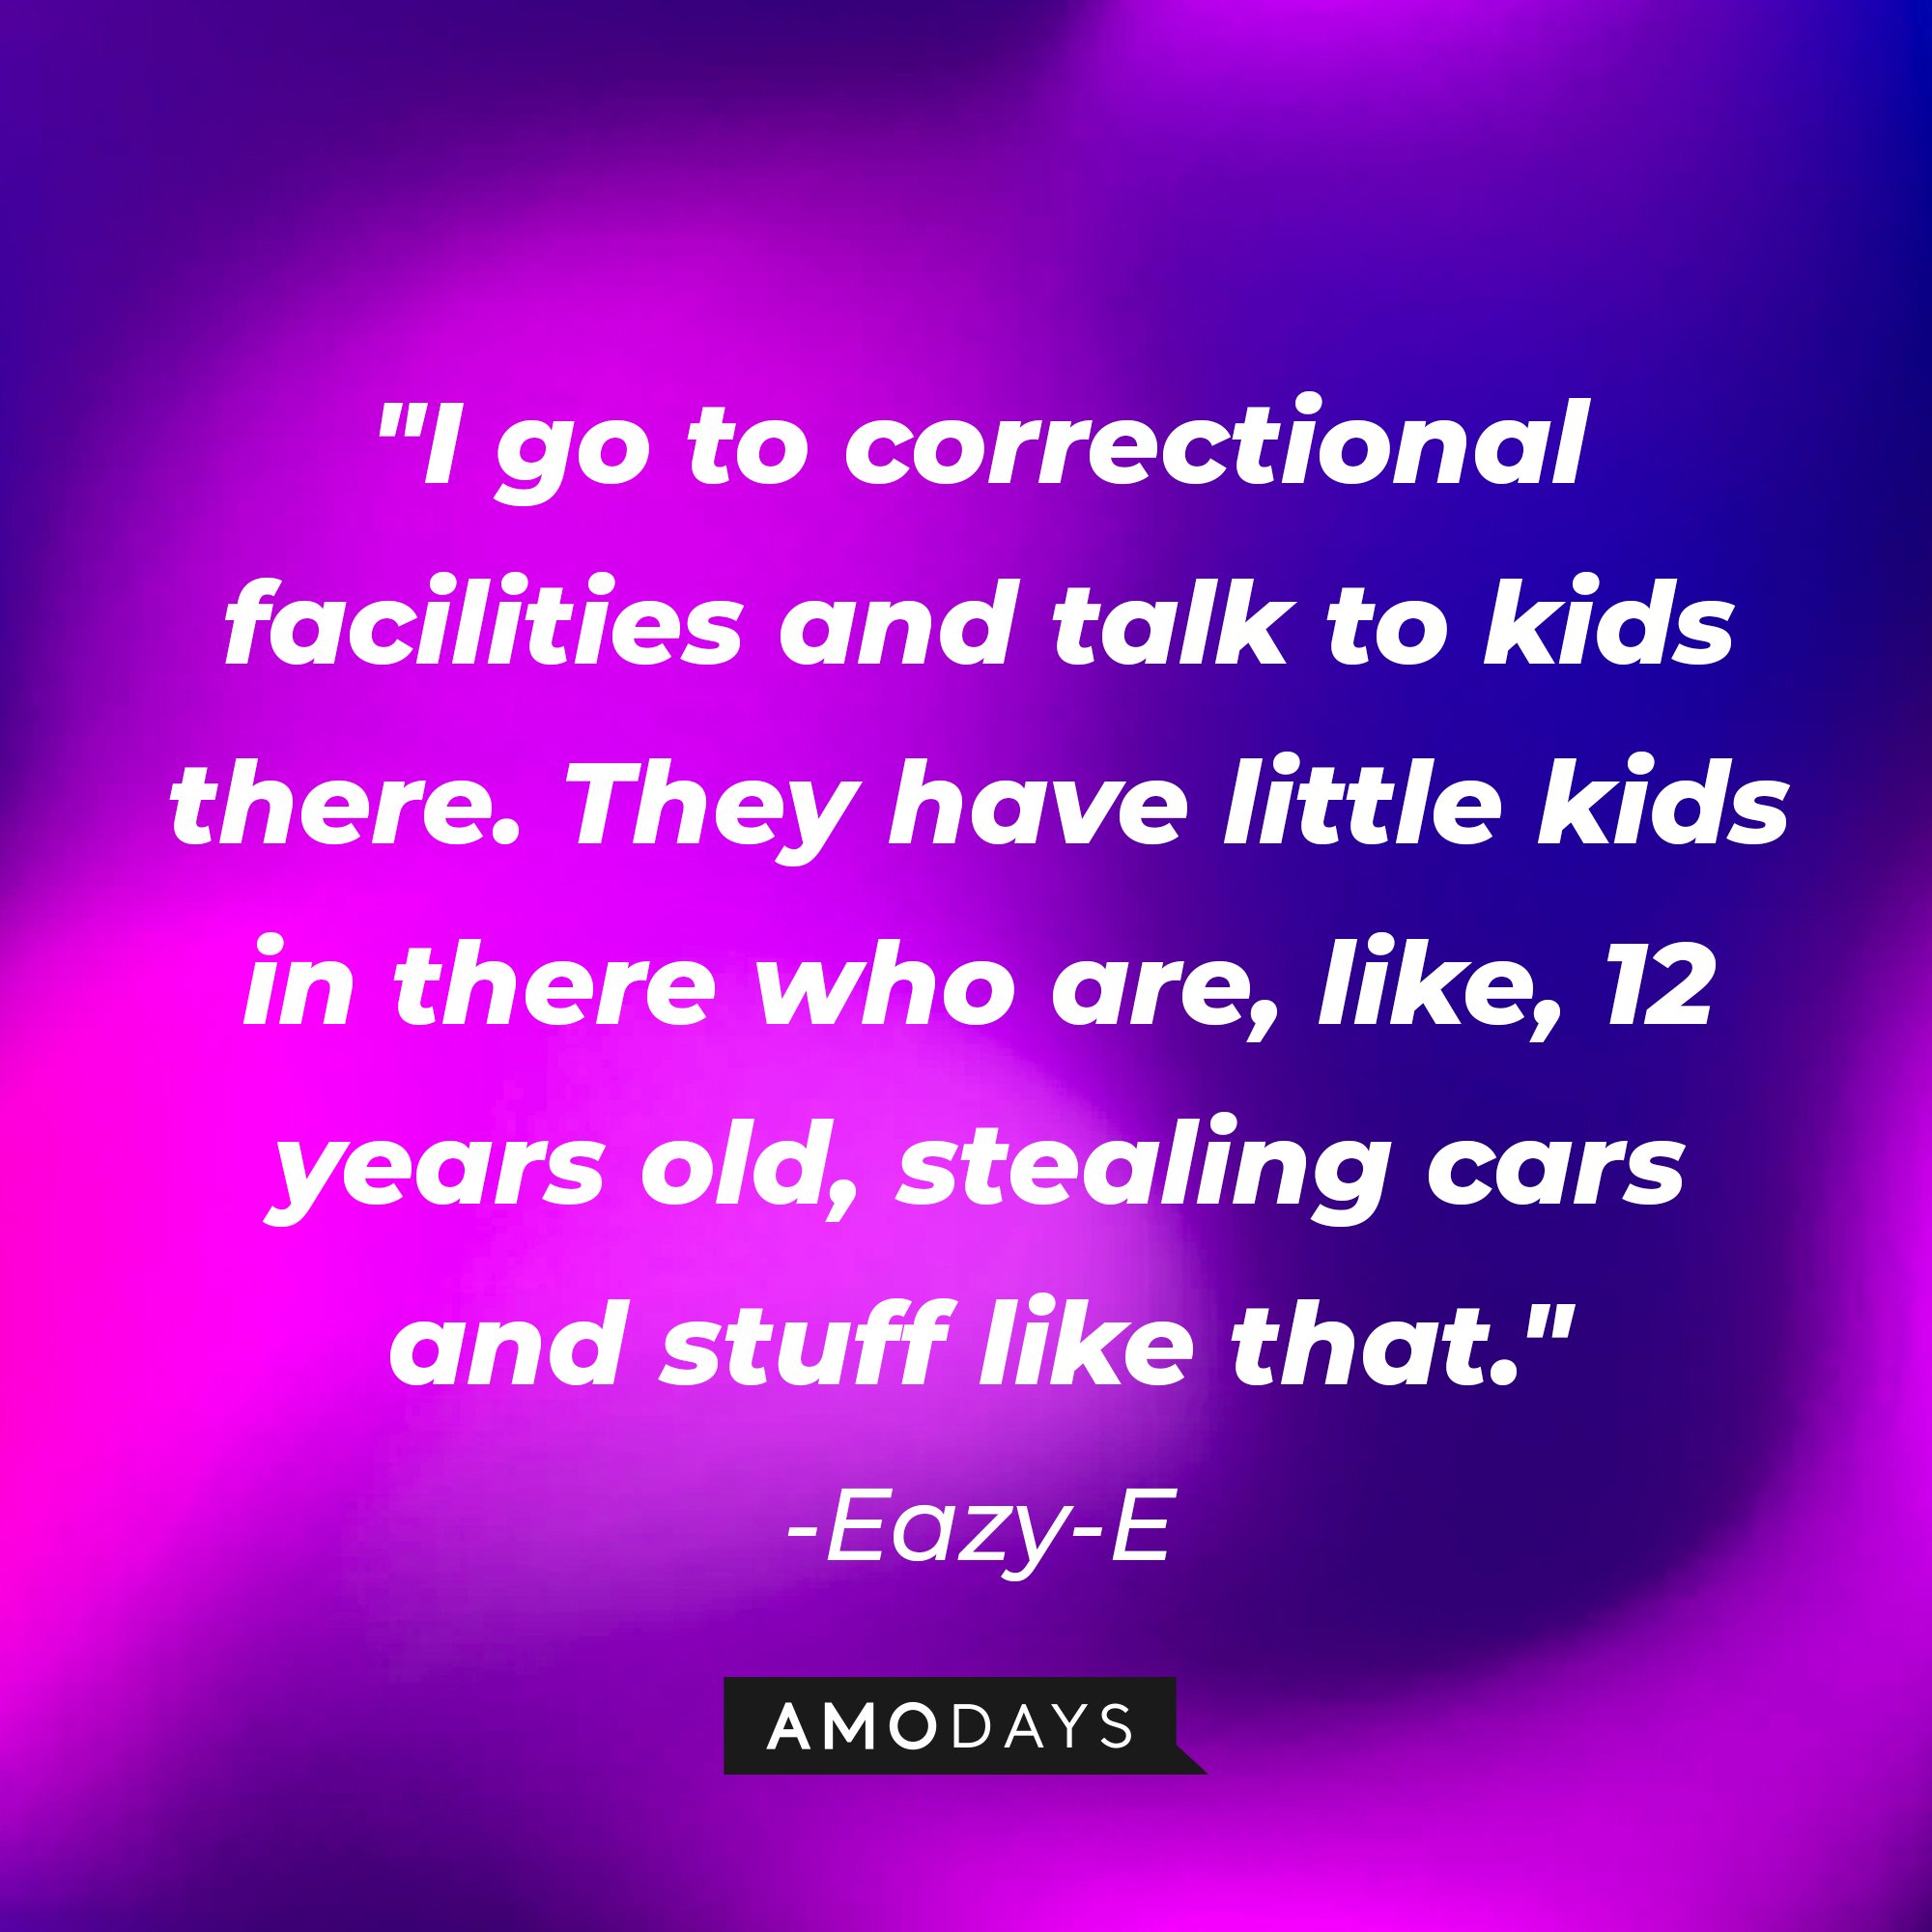 Eazy-E's quote: "I go to correctional facilities and talk to kids there. They have little kids in there who are, like, 12 years old, stealing cars and stuff like that." — Eazy E | Image: AmoDays